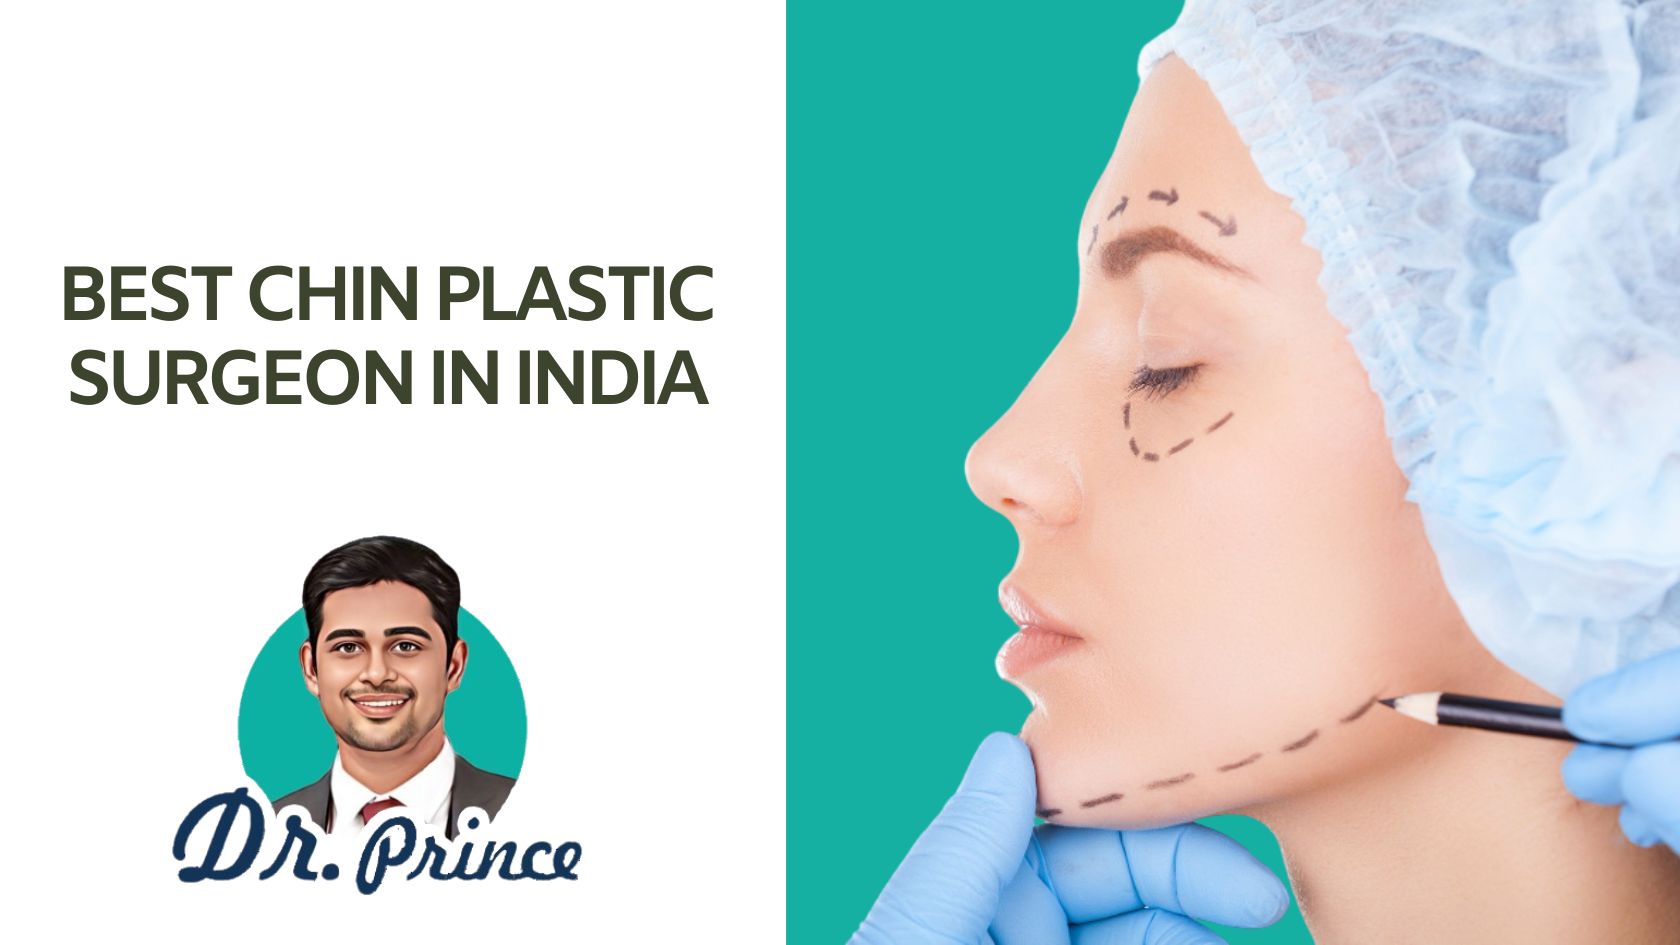 Dr. Prince performing chin plastic surgery in Kerala